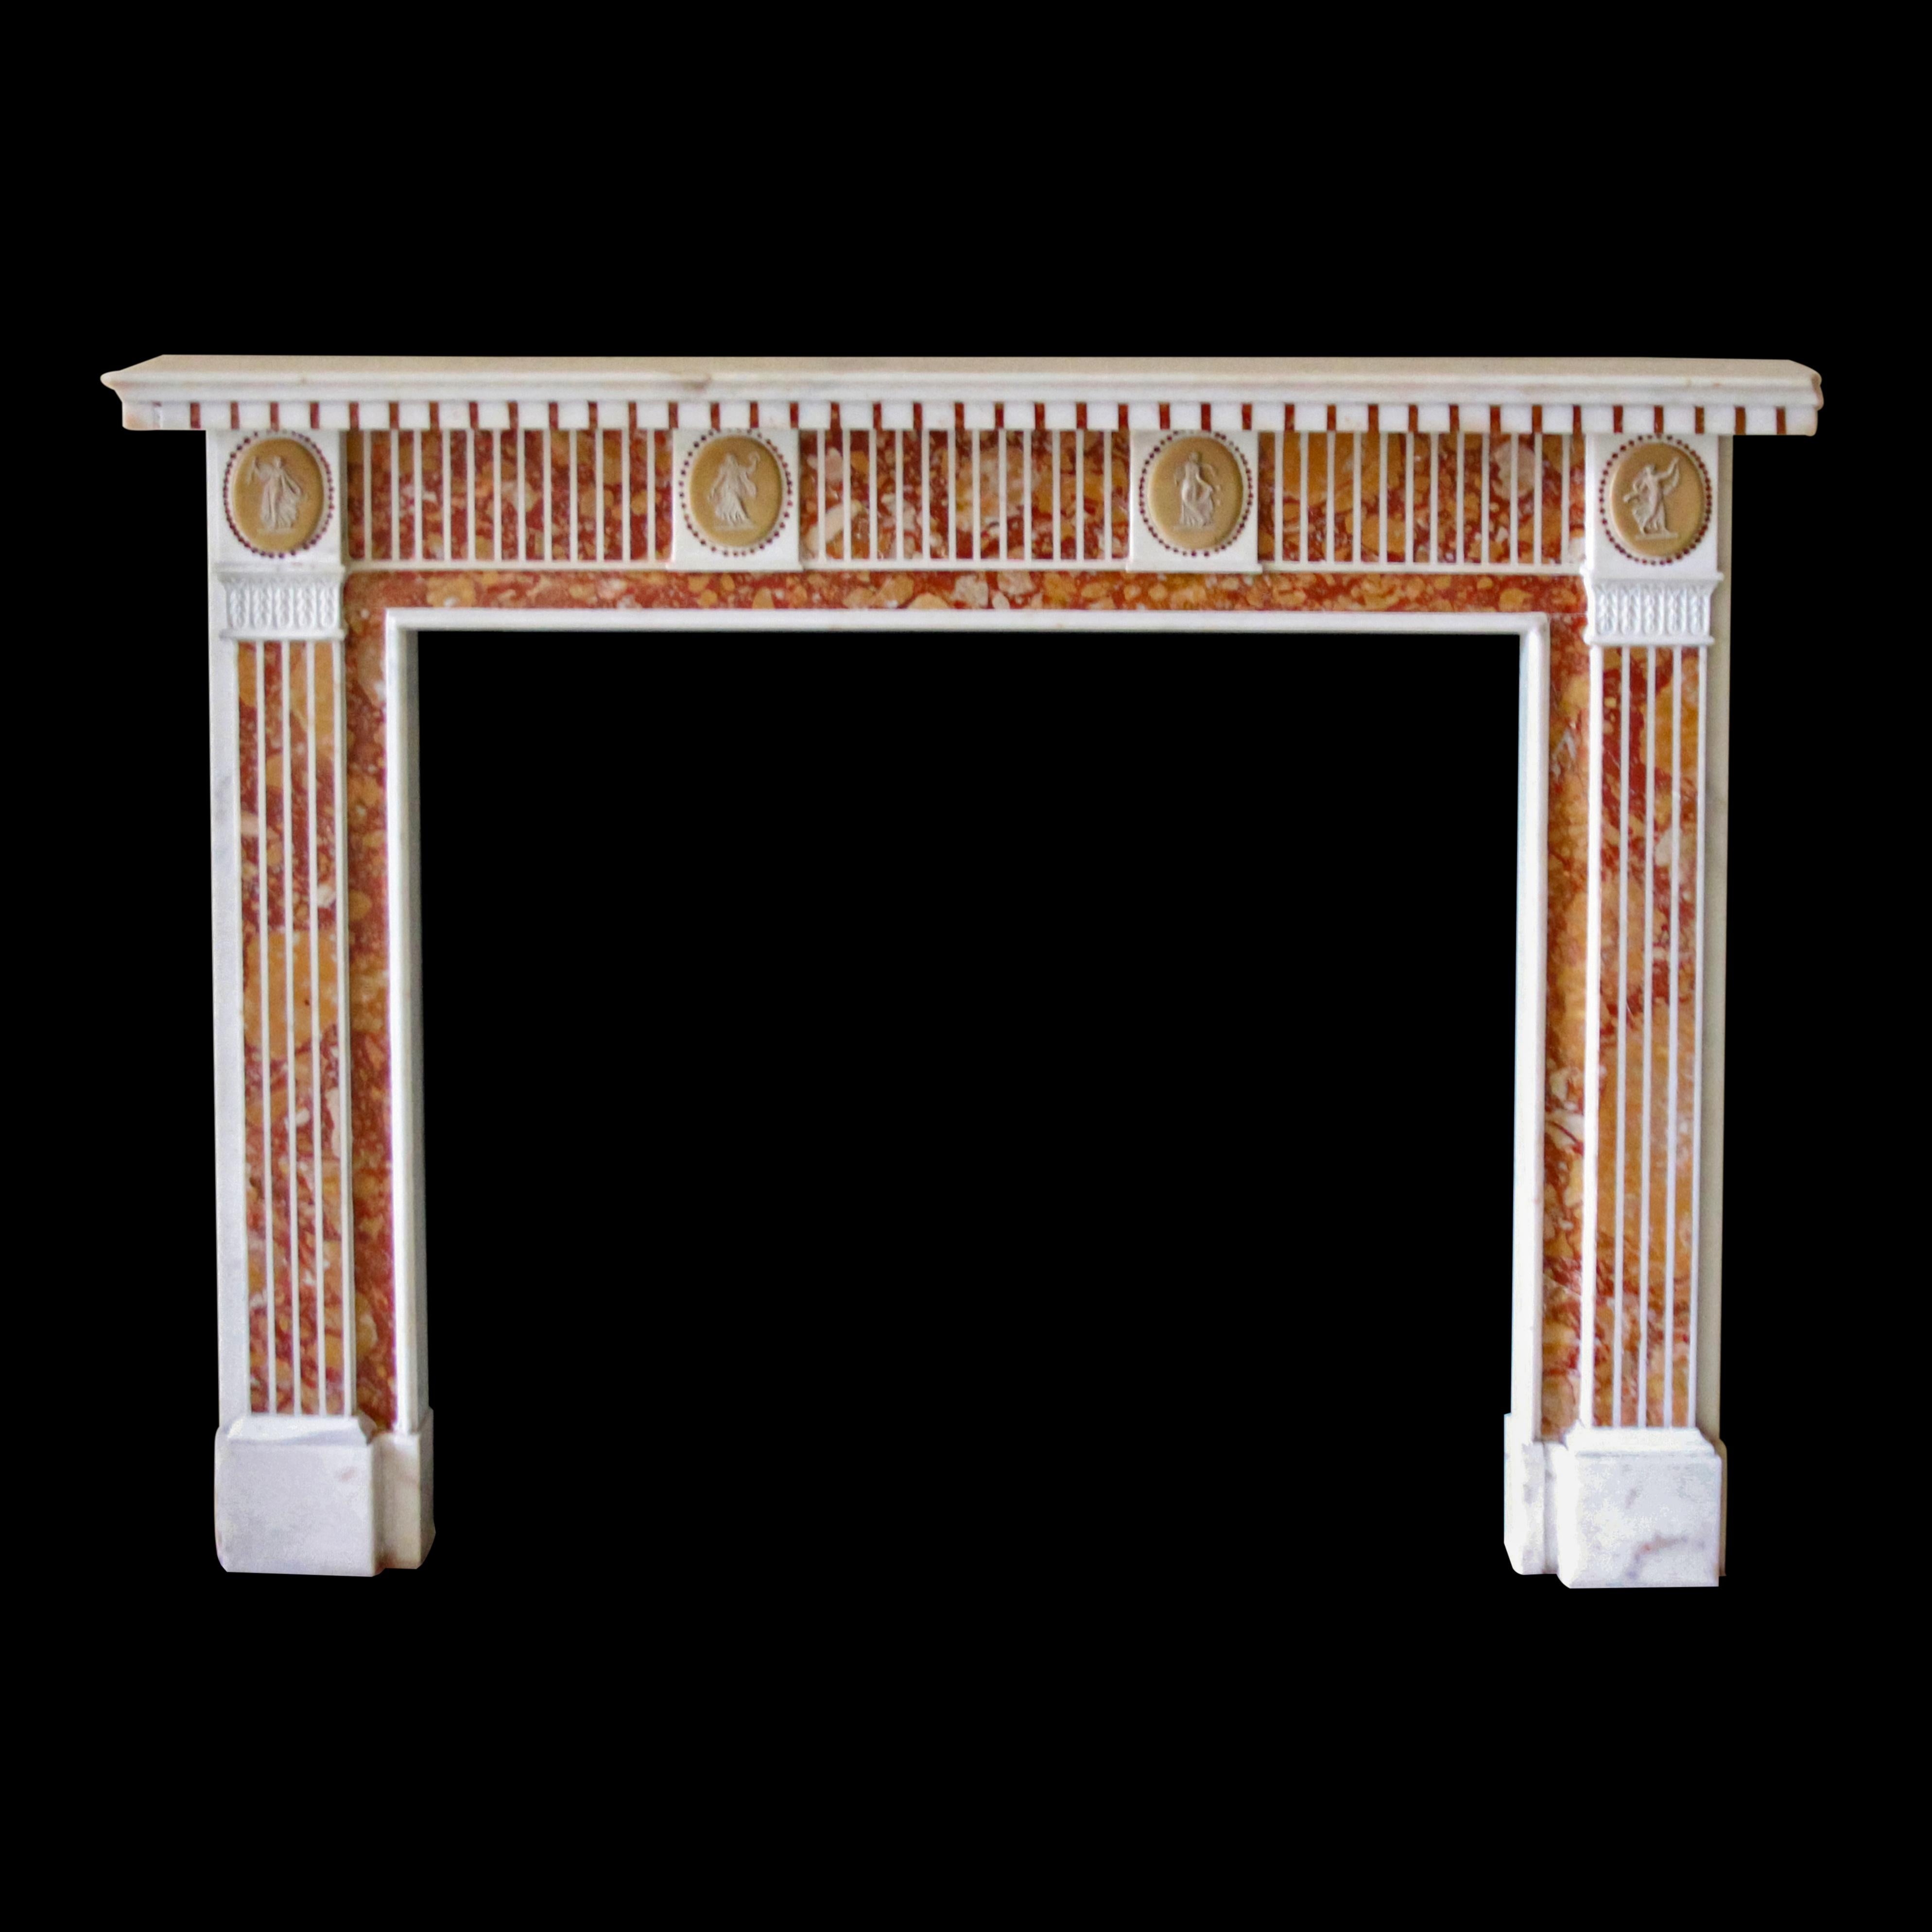 Red, yellow and white decorative marble mantel. This is original to suite 37F of the NYC Waldorf Astoria Hotel. The NYC Waldorf Astoria opened in 1931 but sourced antique marble mantels from Europe at the time so each suite had a distinct look from